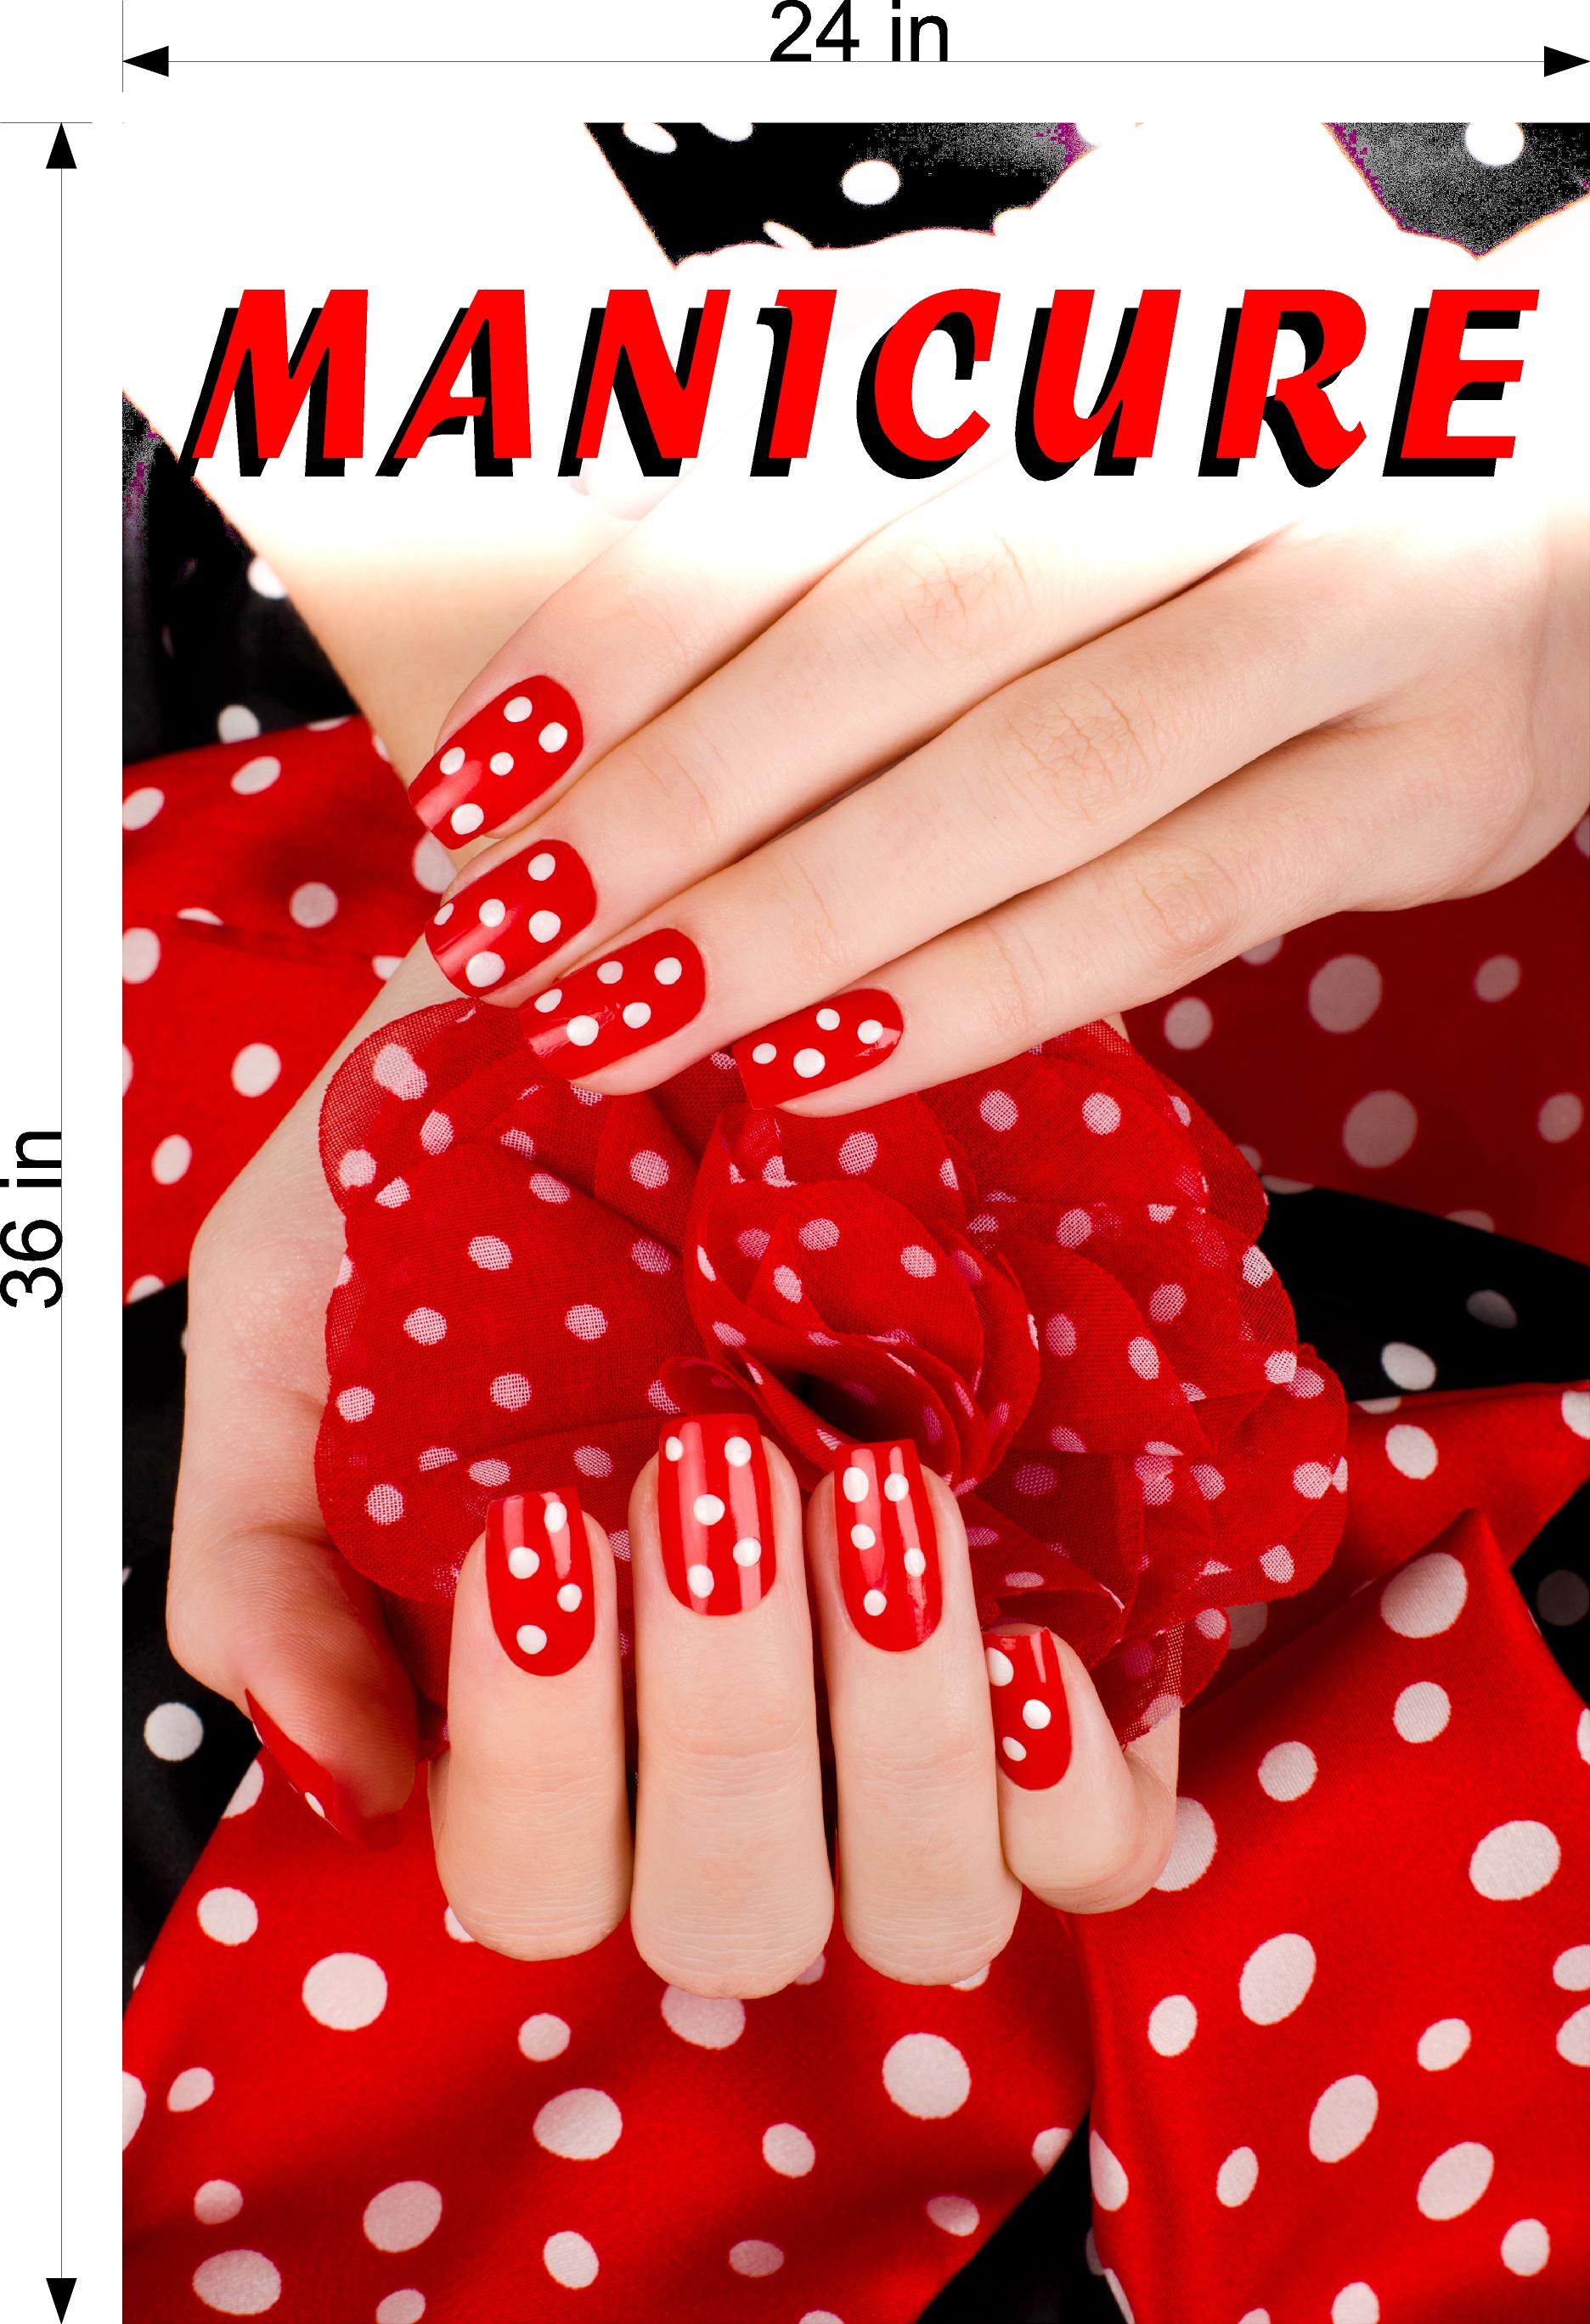 Manicure 15 Wallpaper Poster Decal with Adhesive Backing Wall Sticker Decor Indoors Interior Sign Vertical